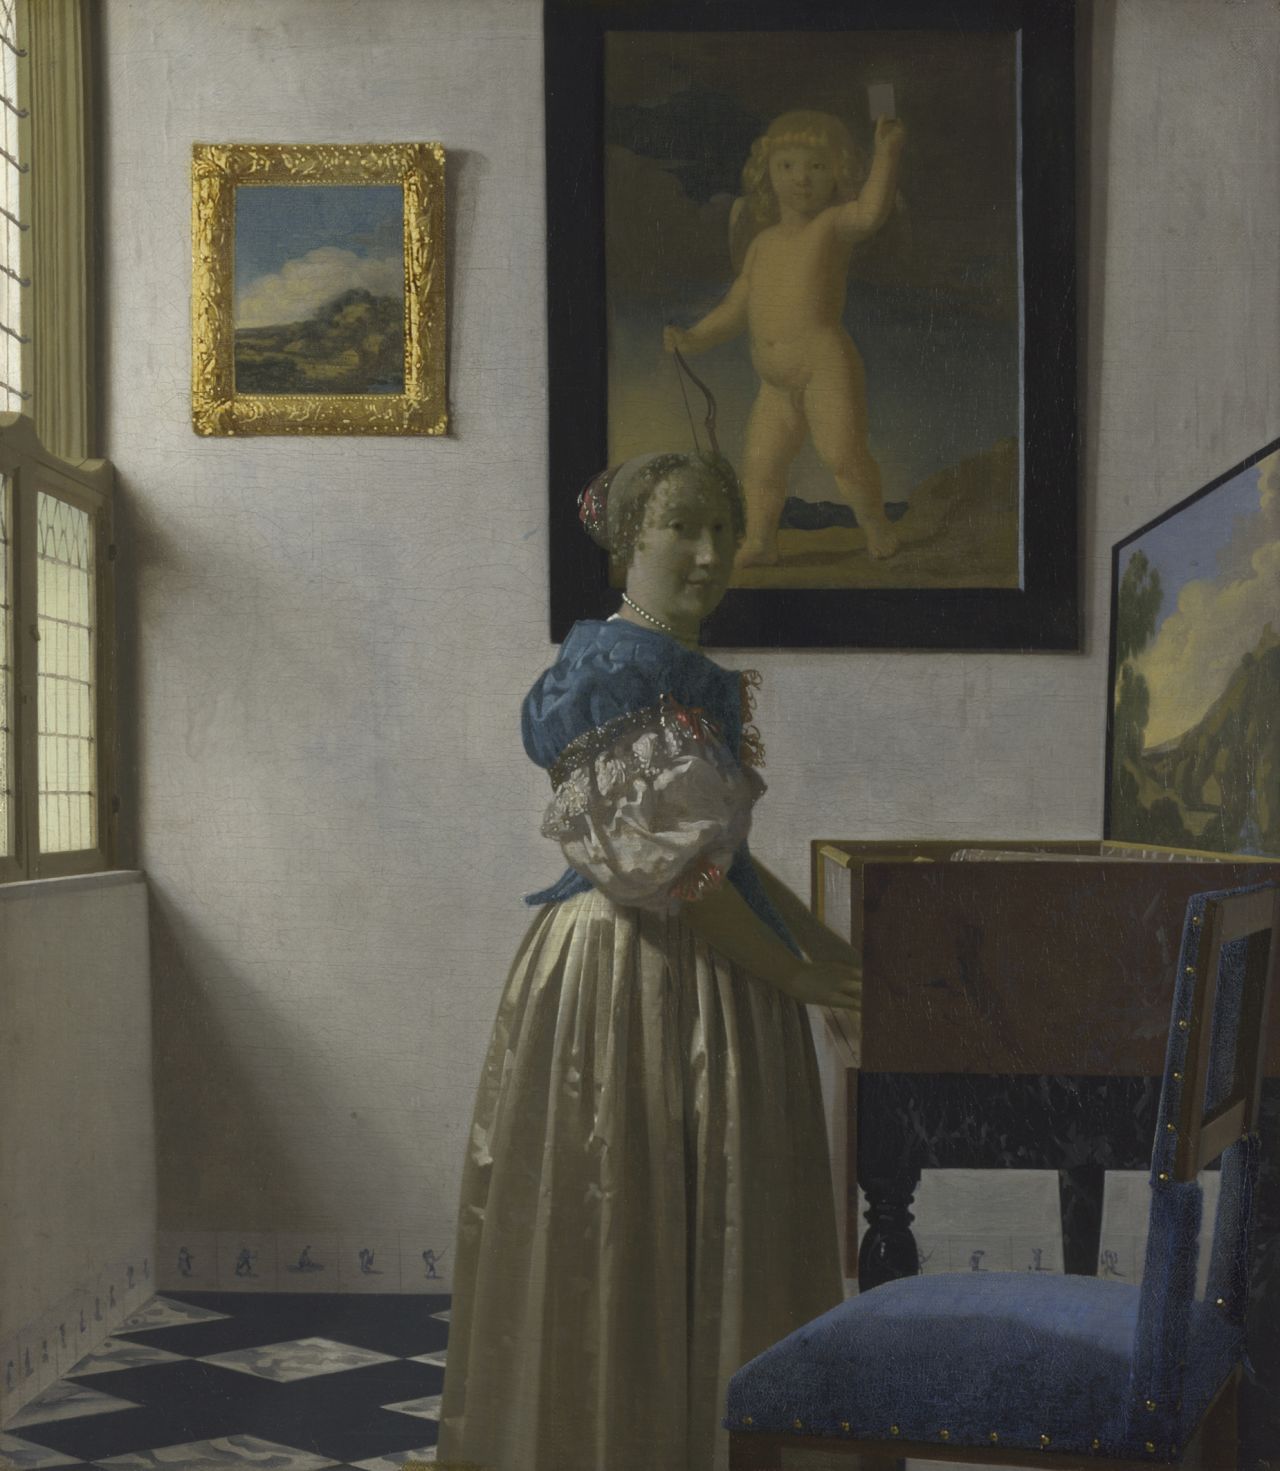 The same cupid has appeared in other works. According to art historian Stephan Koja, Vermeer may have owned the painting it was based on.